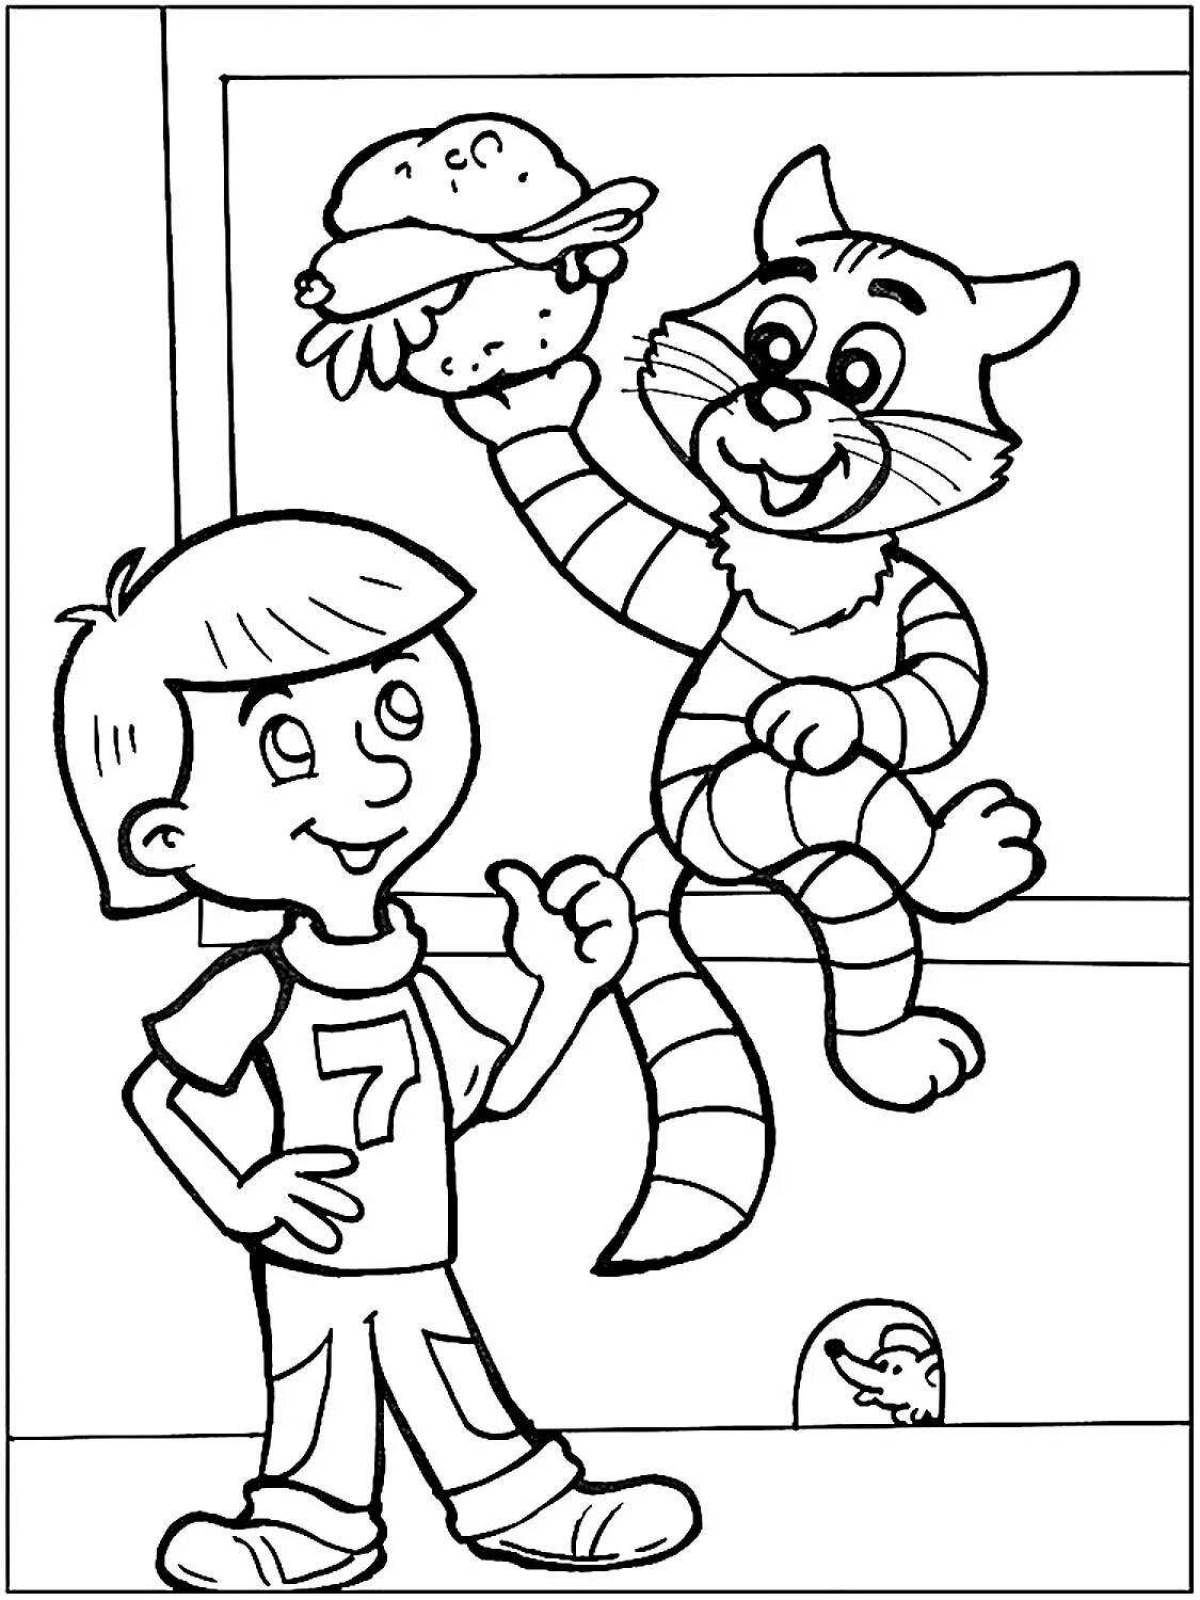 Uncle fedor's colorful dog and cat coloring page